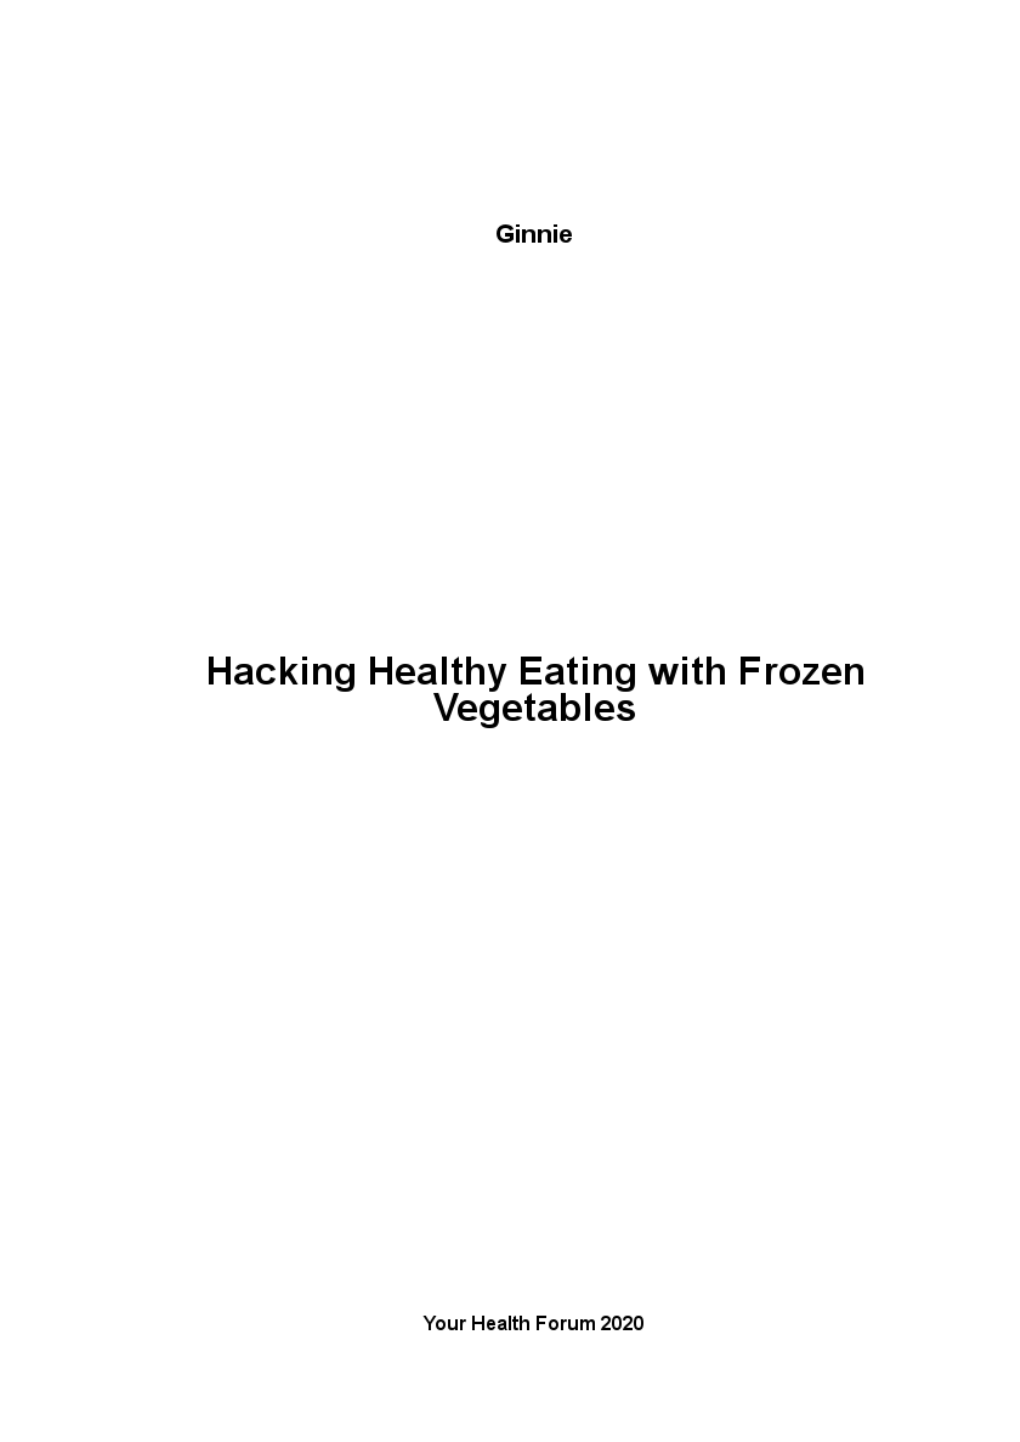 Hacking Healthy Eating with Frozen Vegetables